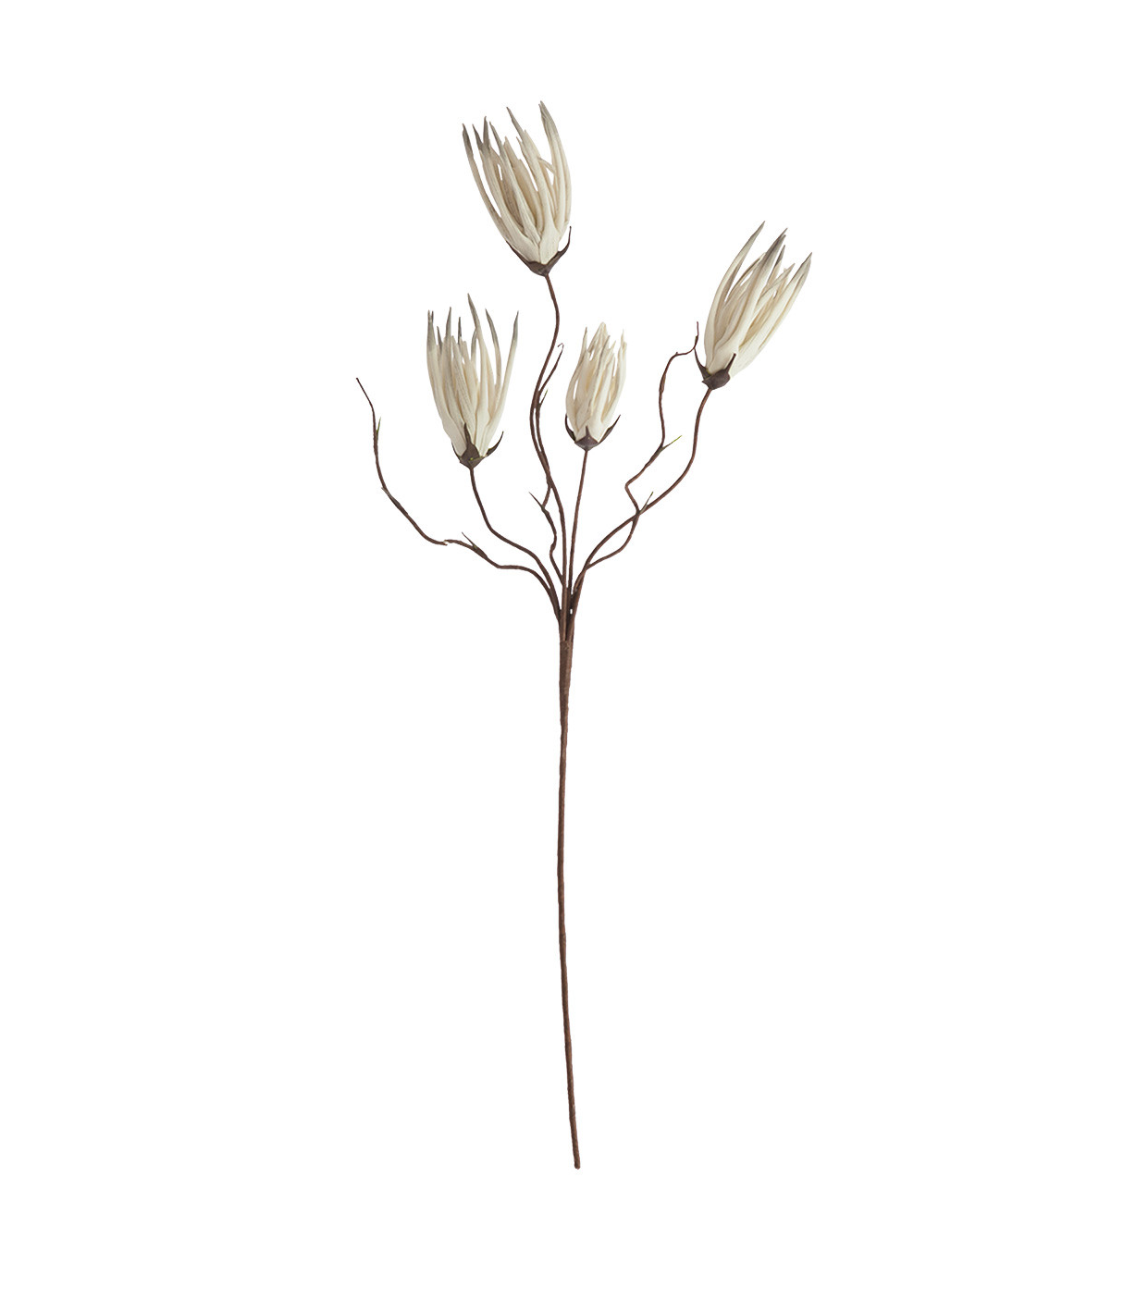 Illustration of a simple Spiky Botanical Stems with four delicate, elongated white flowers against a plain background, showcasing an elegant botanical design typical of Scottsdale, Arizona by Kalalou, Inc.